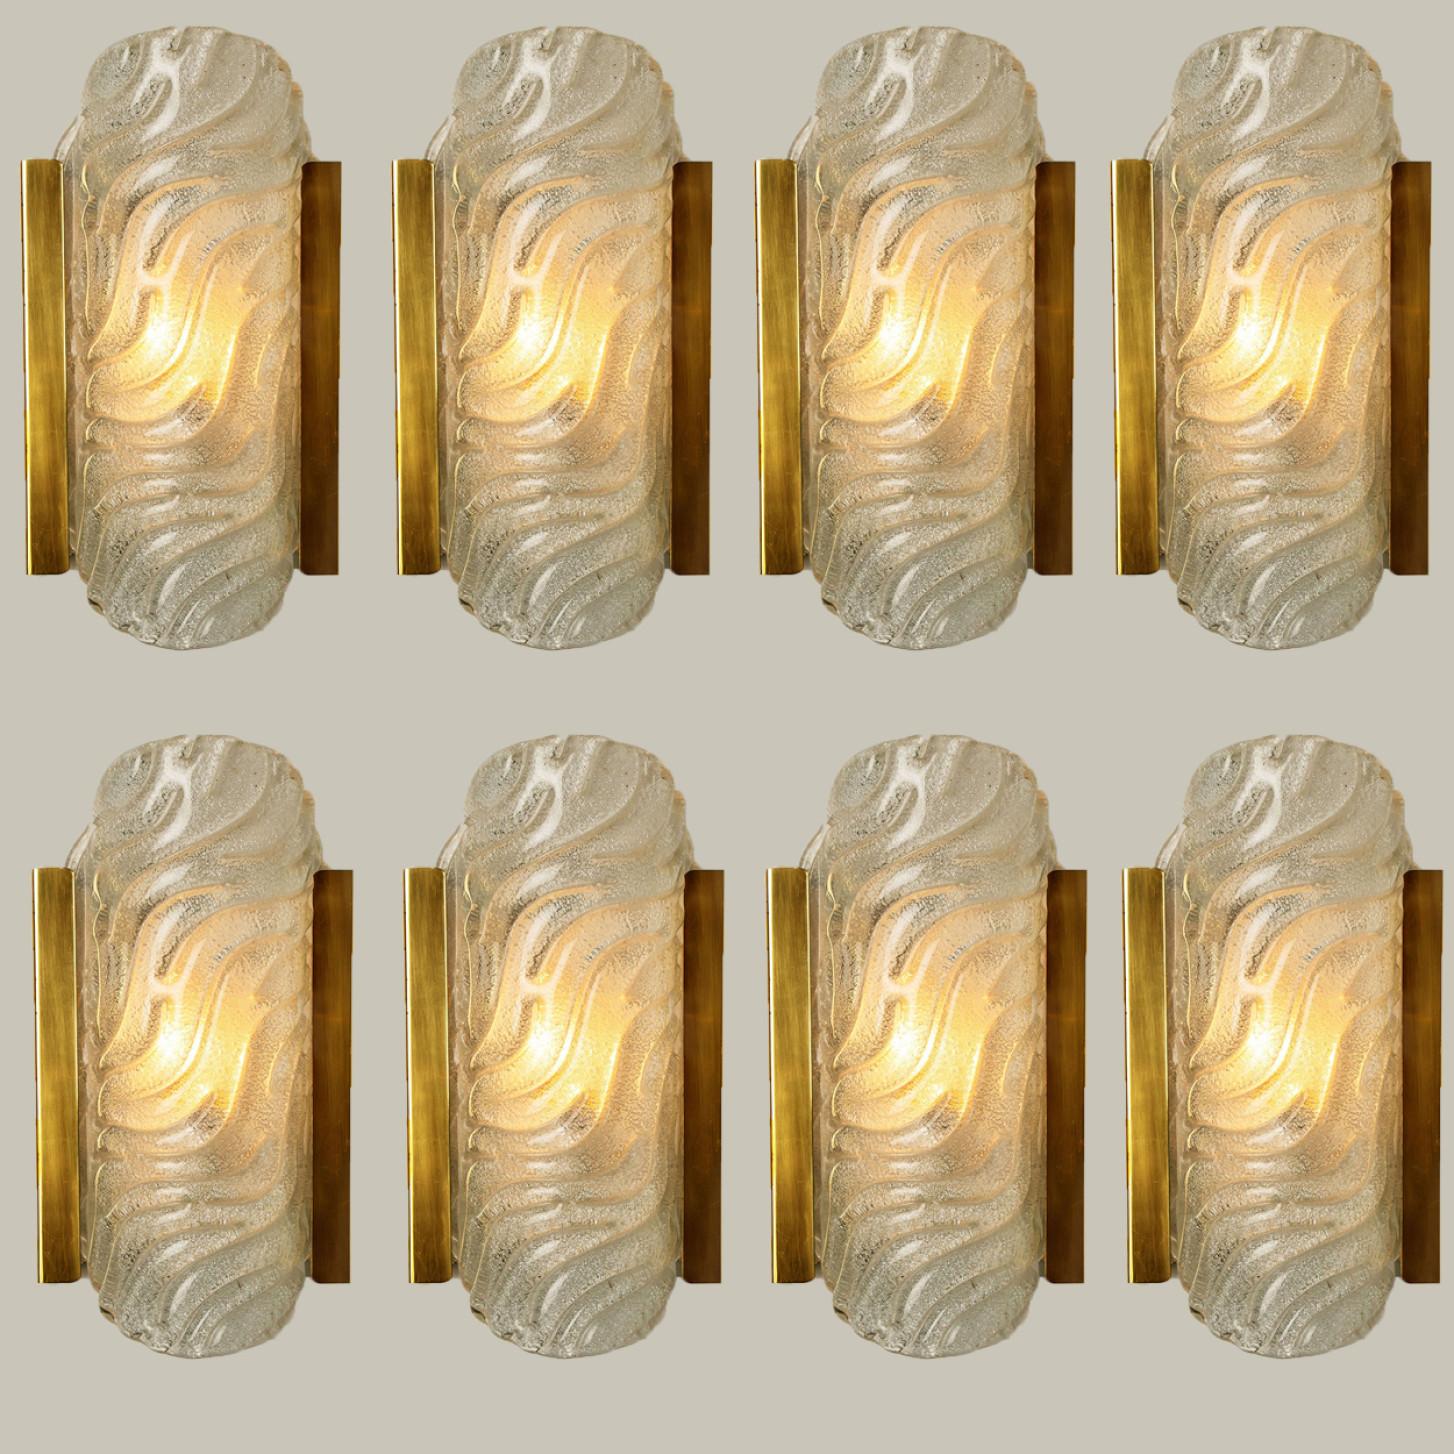 Other Wave Glass and Brass Wall Lights Sconces by Glashütte Limburg, 1960s For Sale